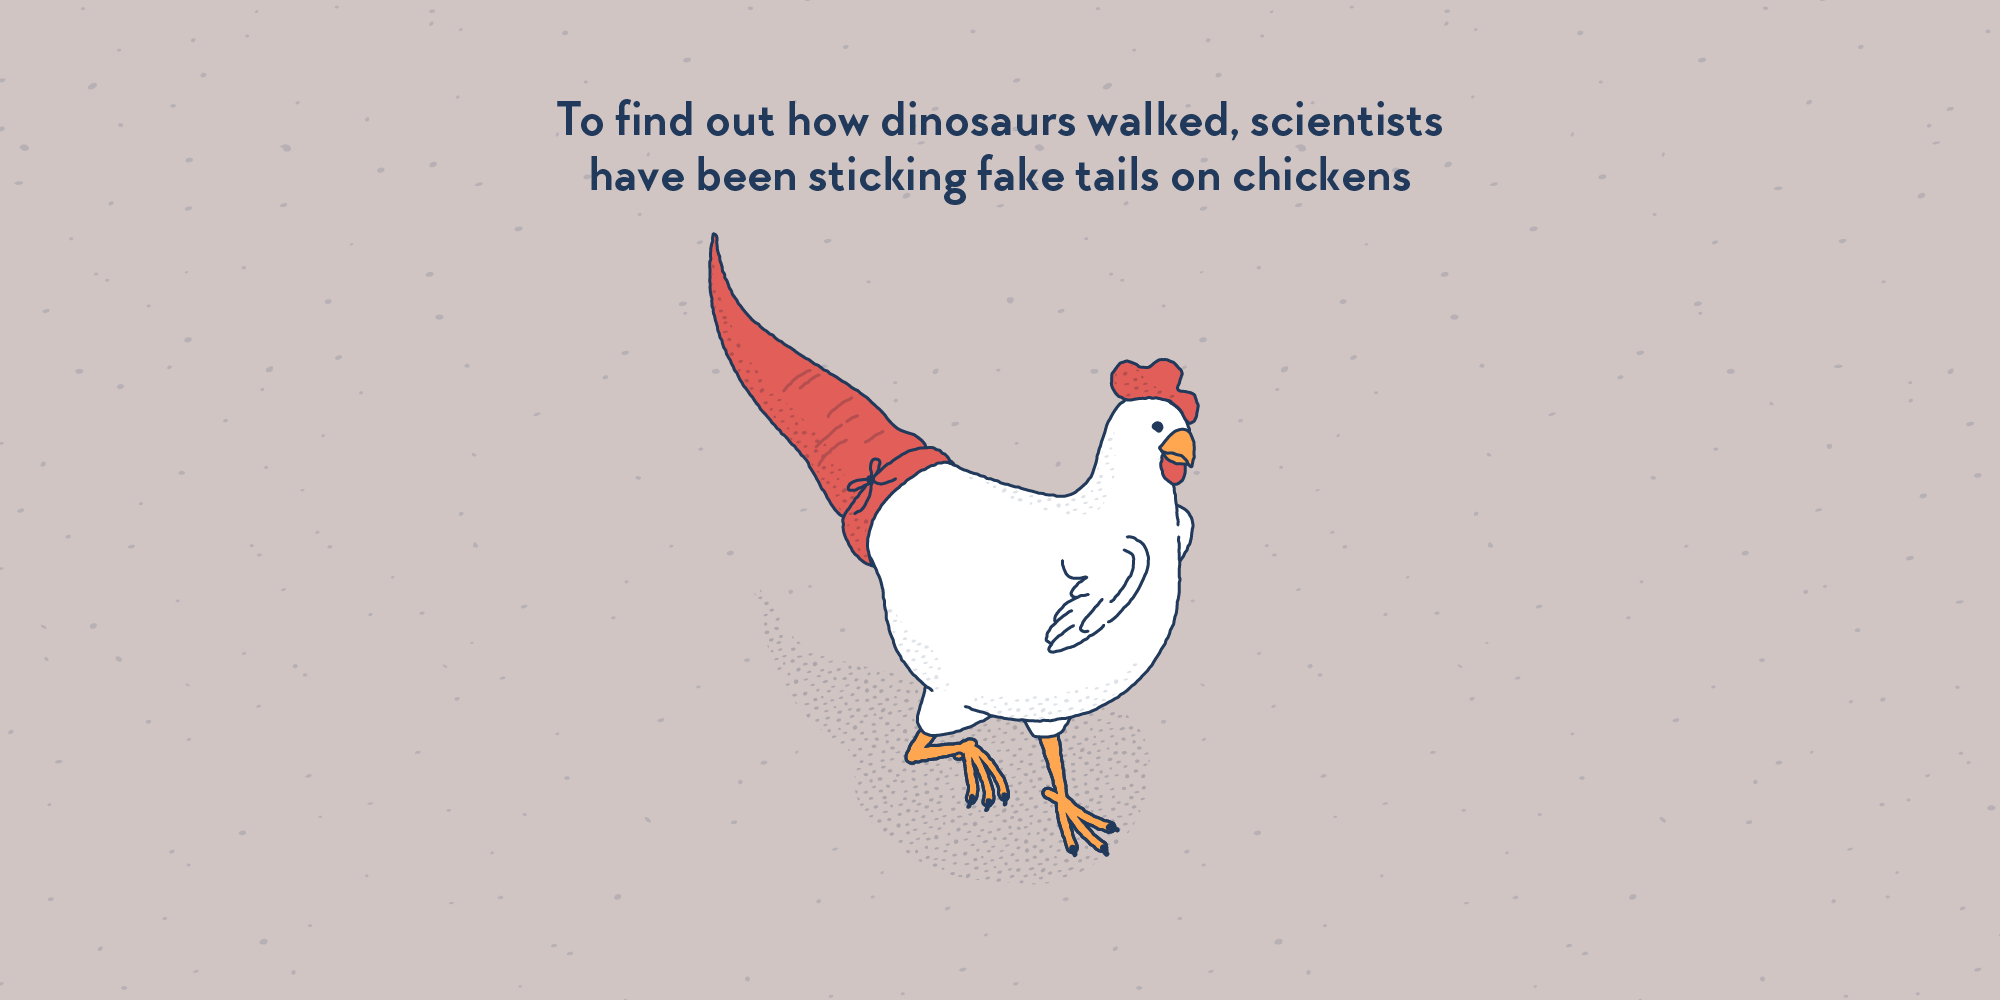 A chicken with a fake T-Rex tail tied behind it.